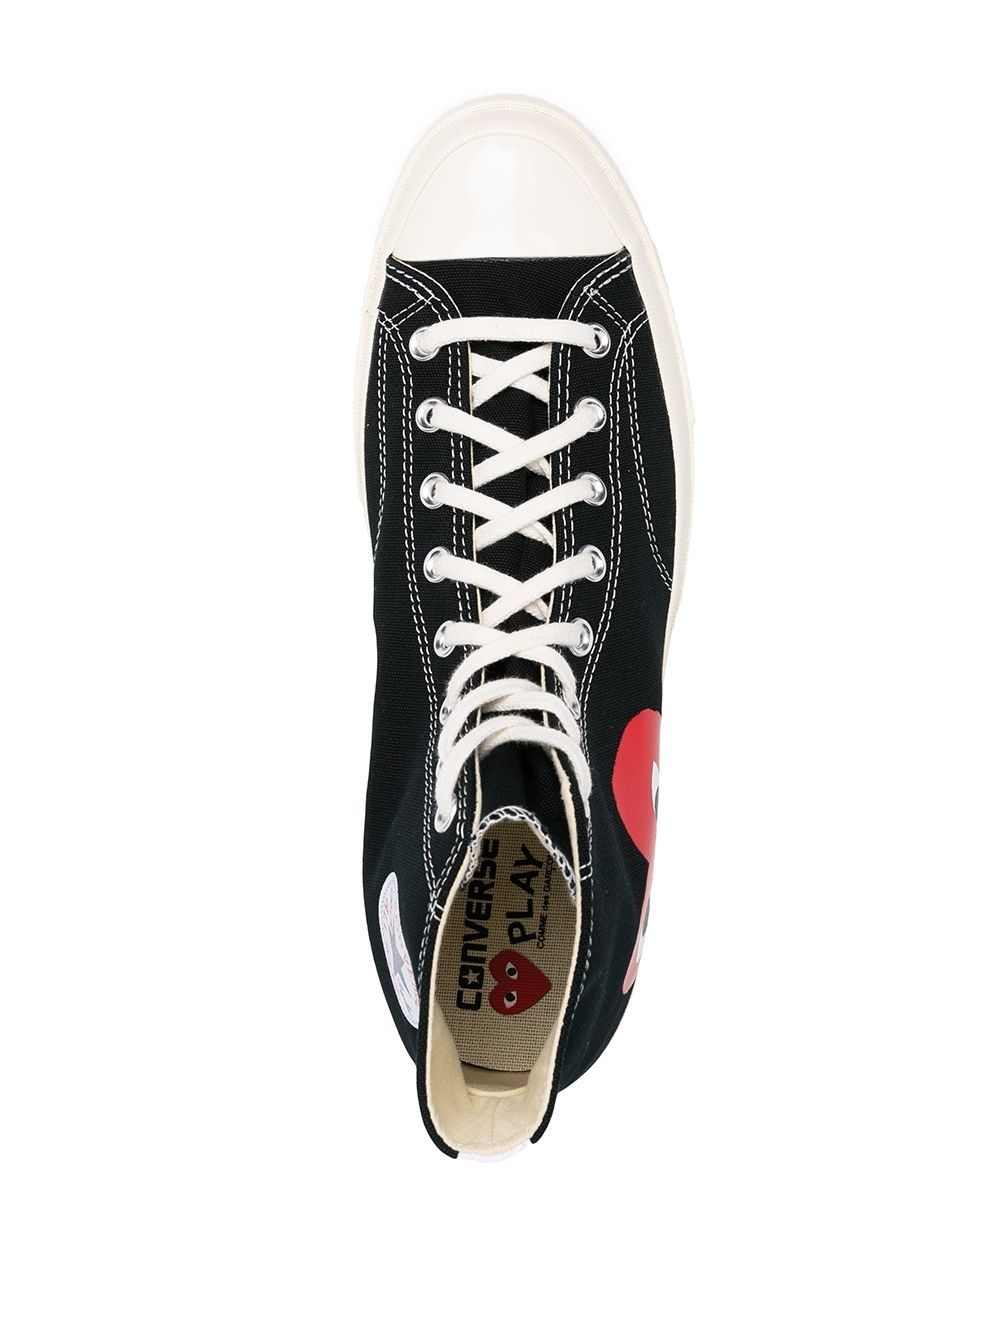 Sneakers alte in canvas x Converse nere/rosse/bianche